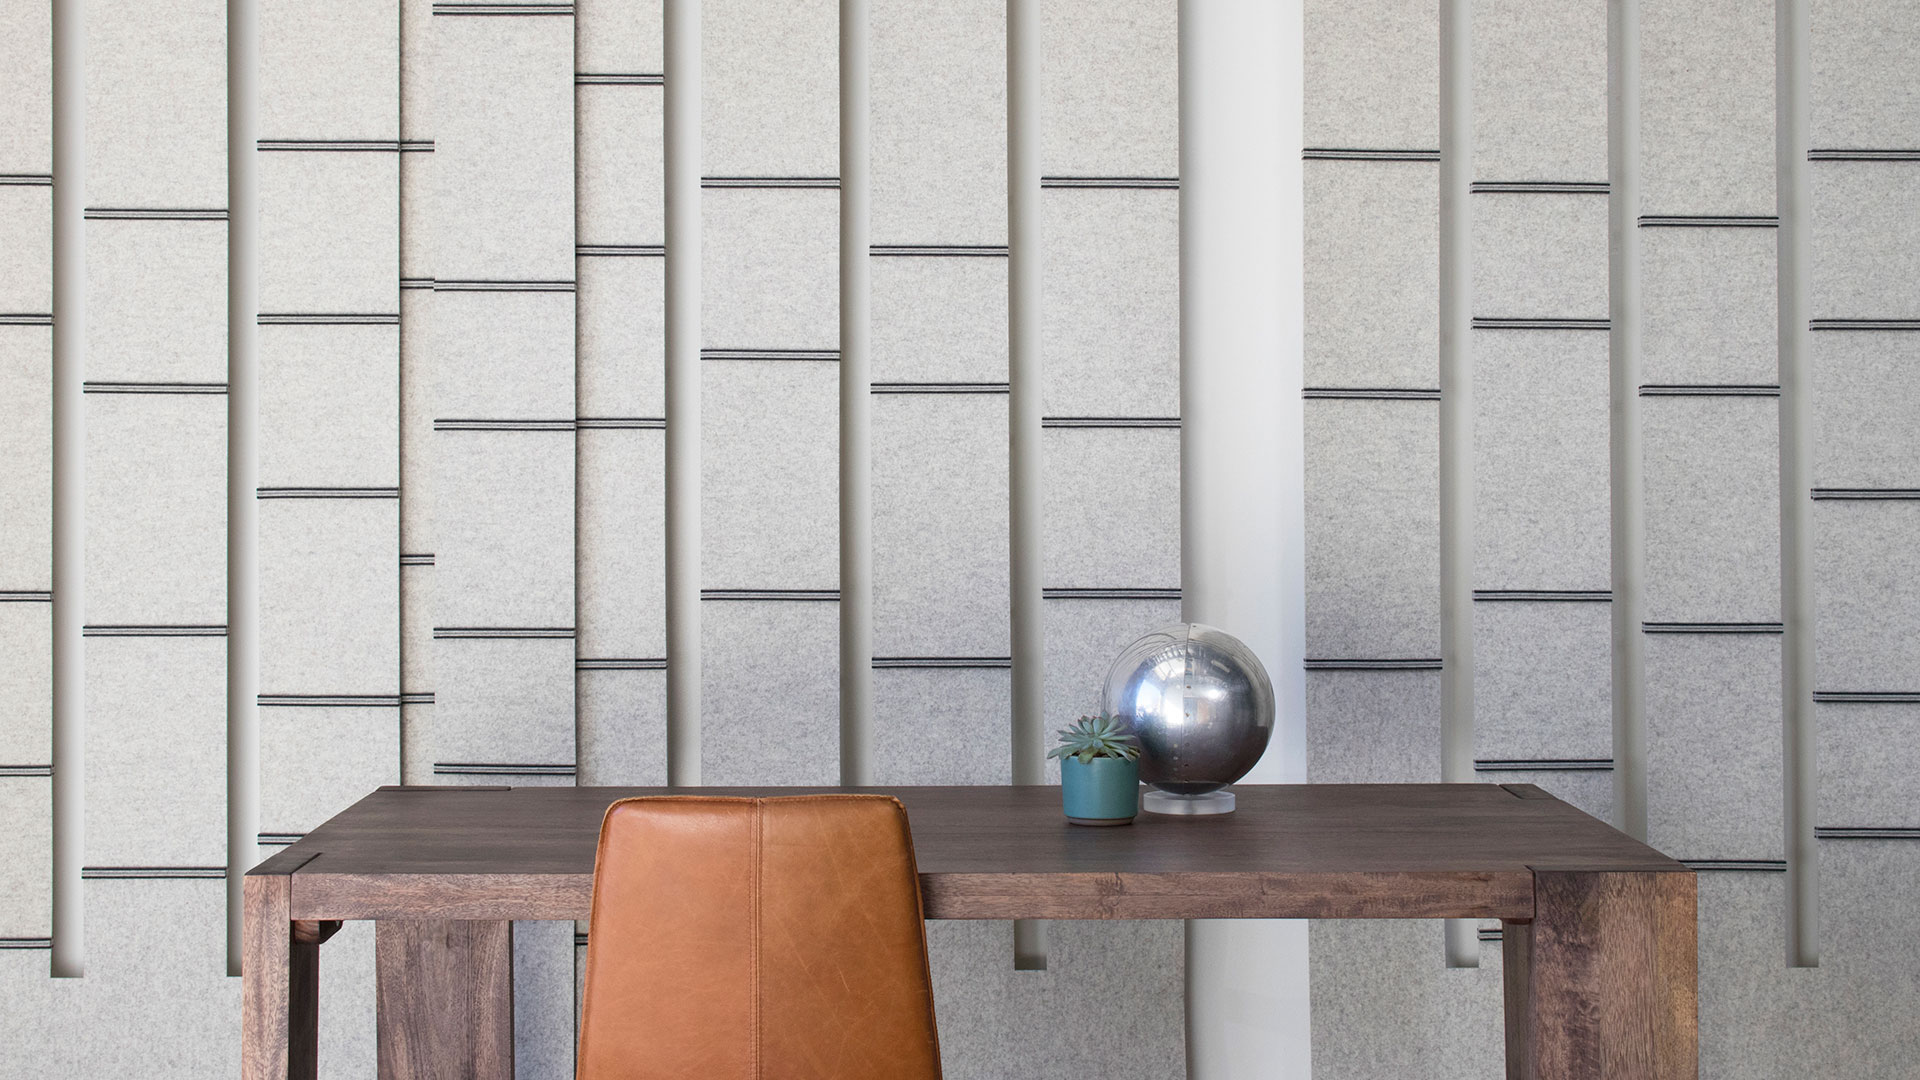 Light gray felt screens in stripes with occasional dark horizontal stripes hang behind a wood desk